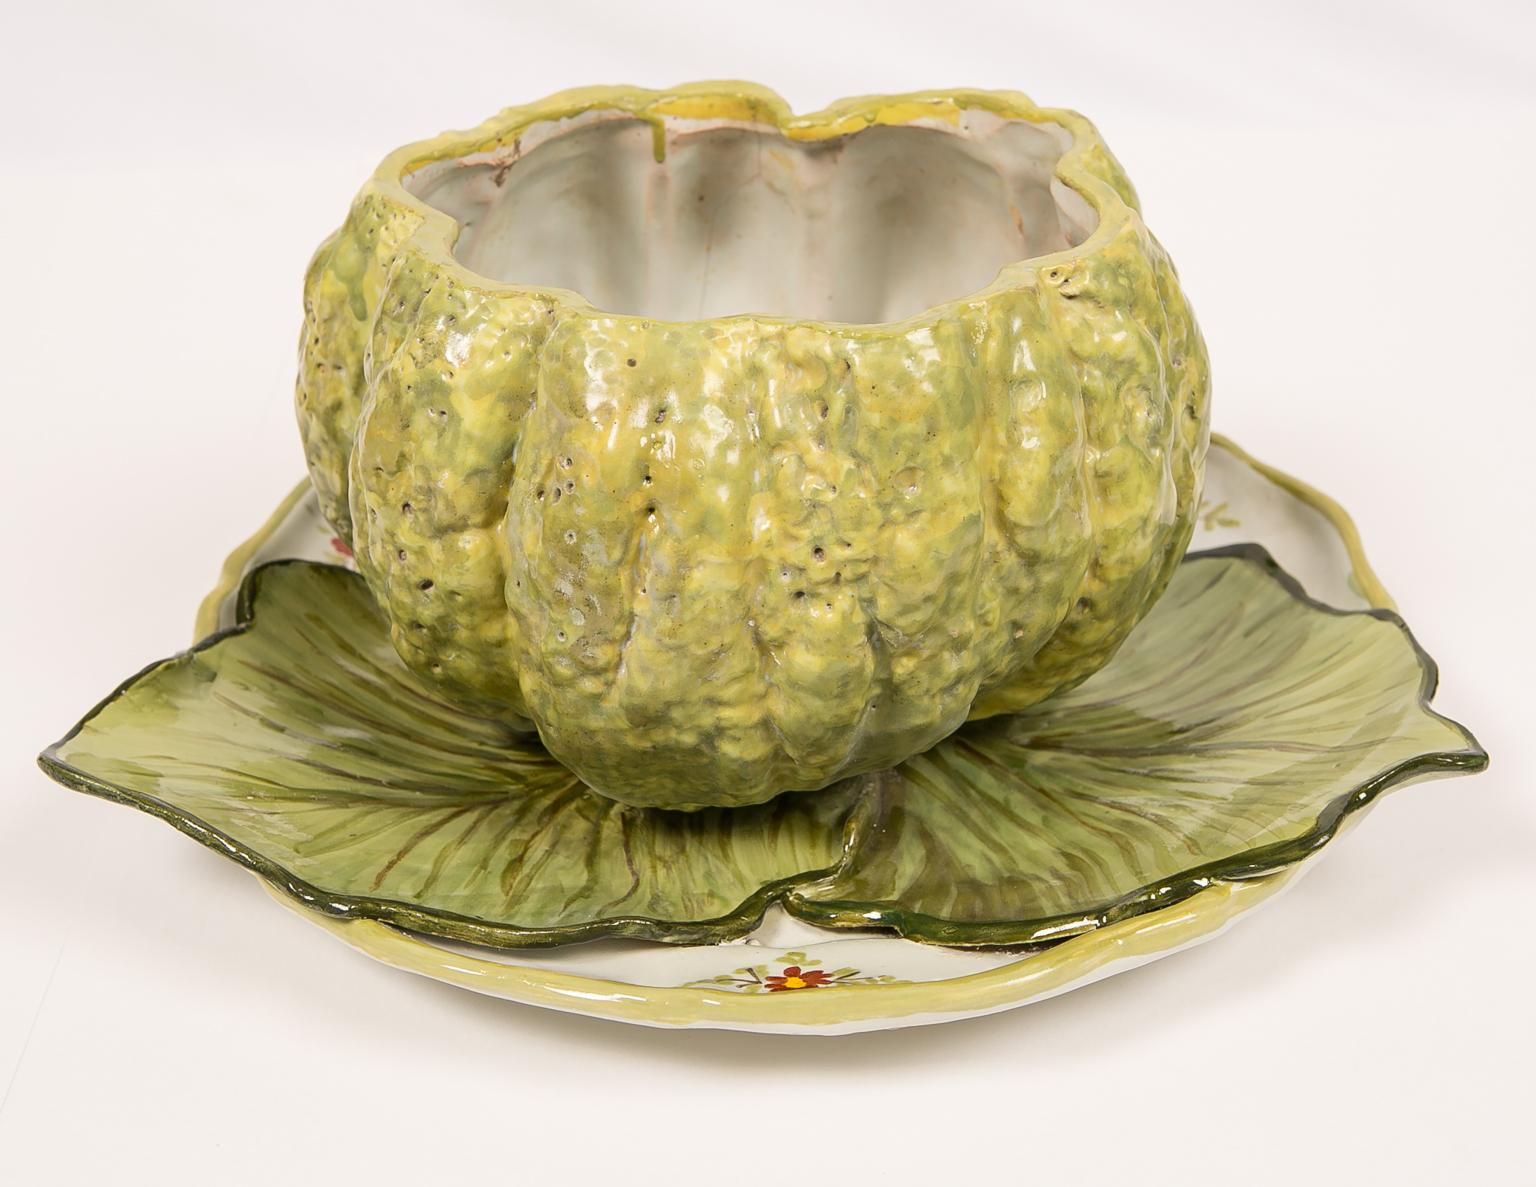 18th Century and Earlier Antique French Faience Tureen Modeled as a Pumpkin 18th Century